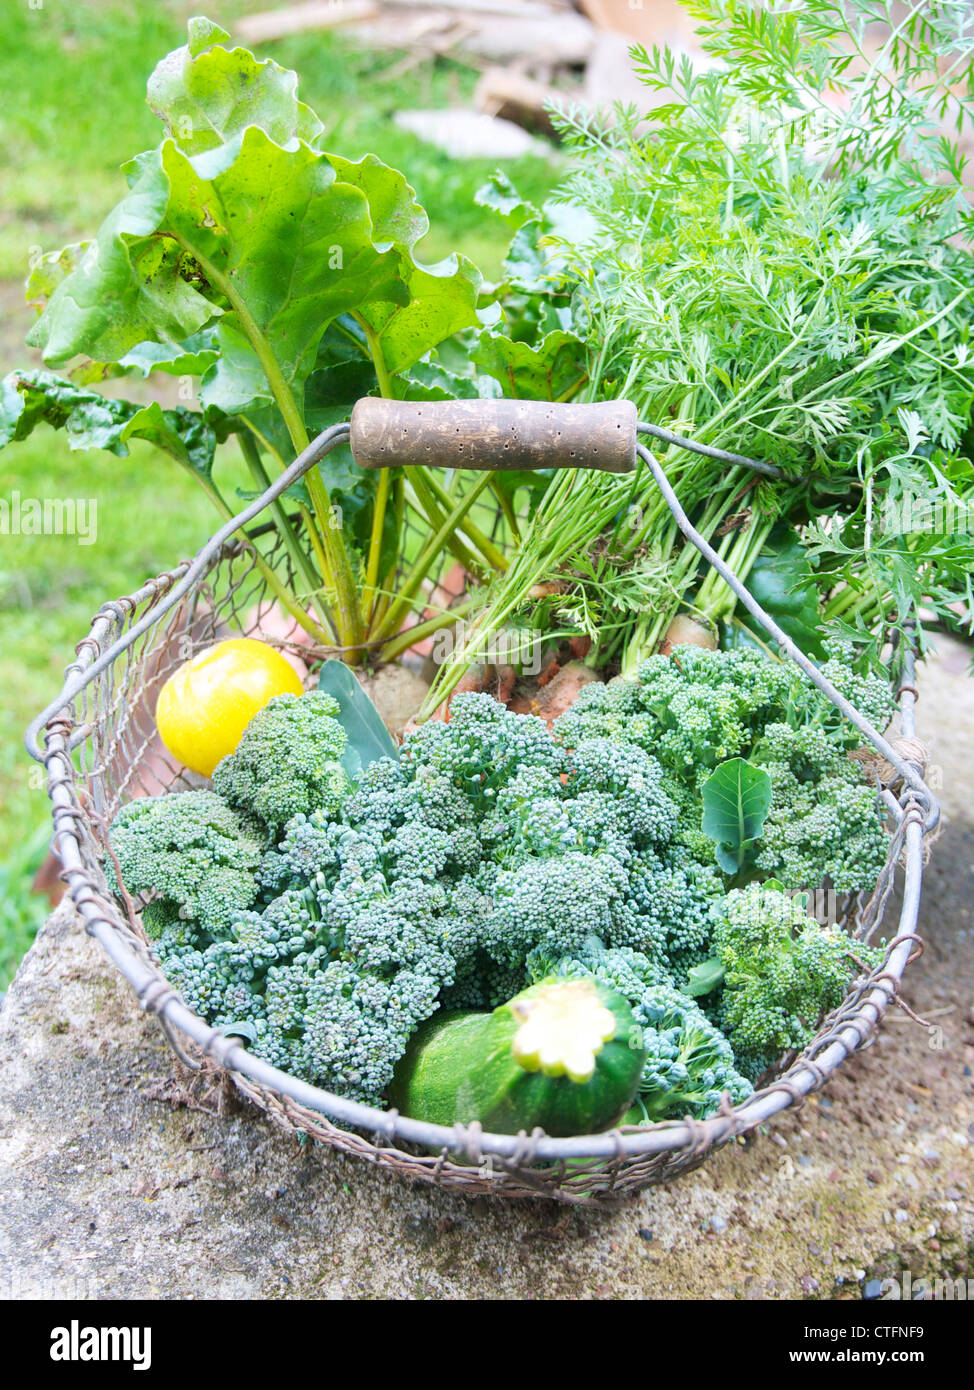 Basket with carrots, zucchini, beet root and broccoli after being harvested in a vegetable garden. Stock Photo